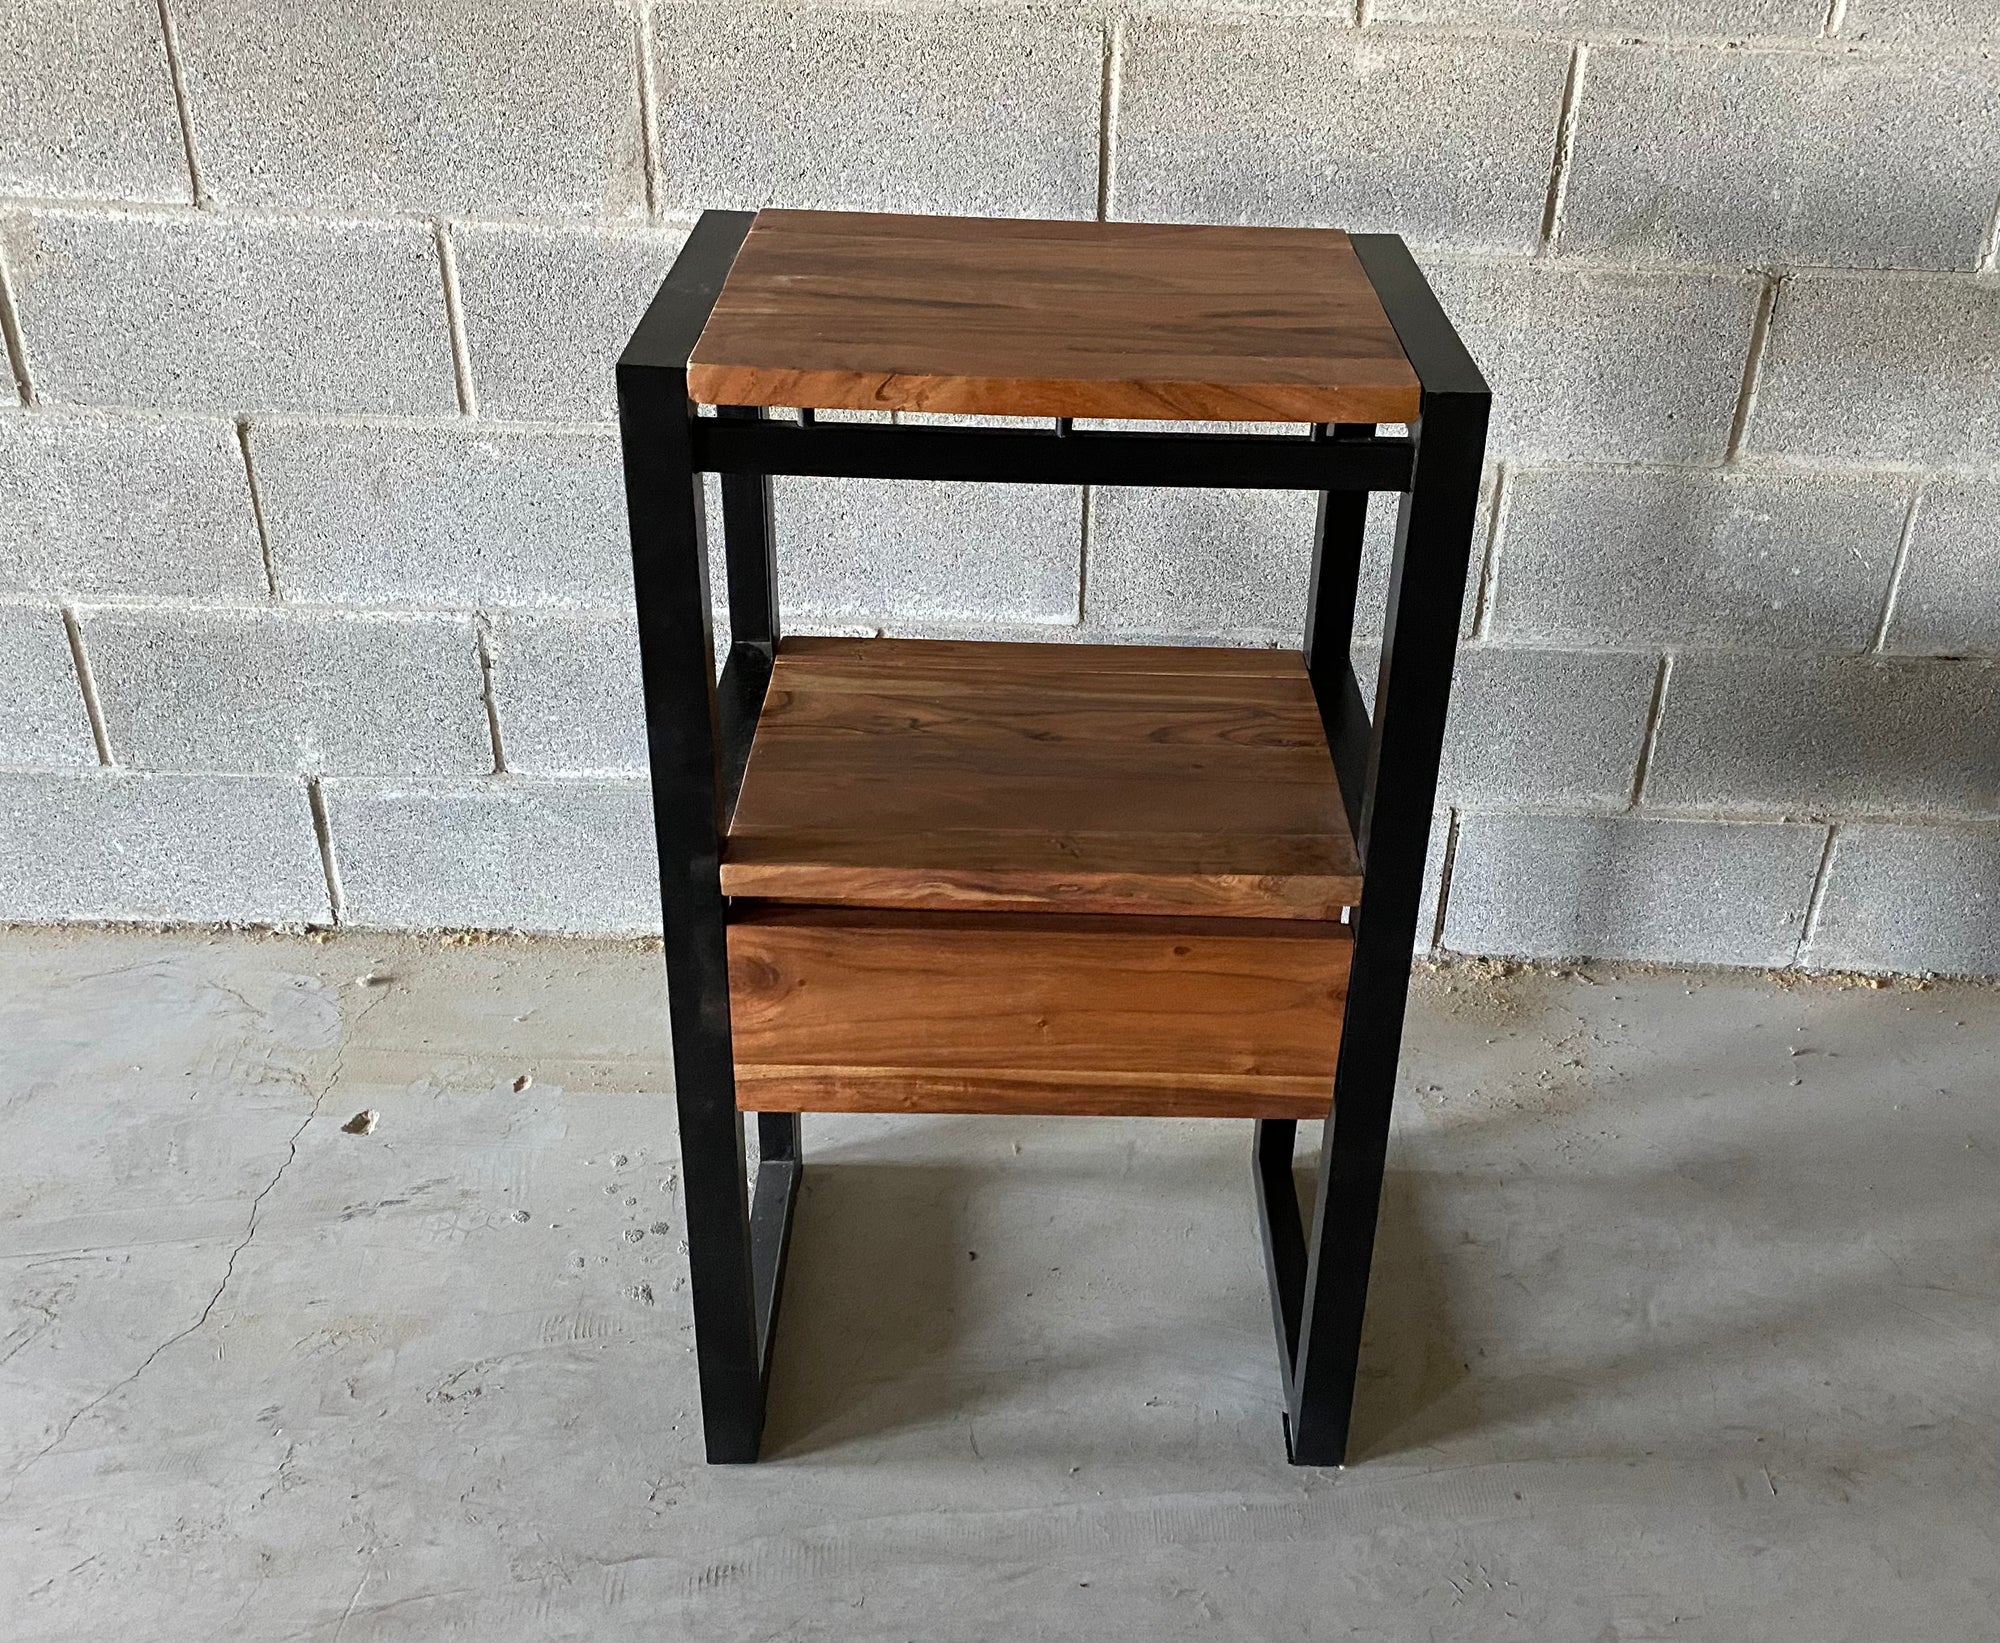 URBAN - night table with 1 drawer